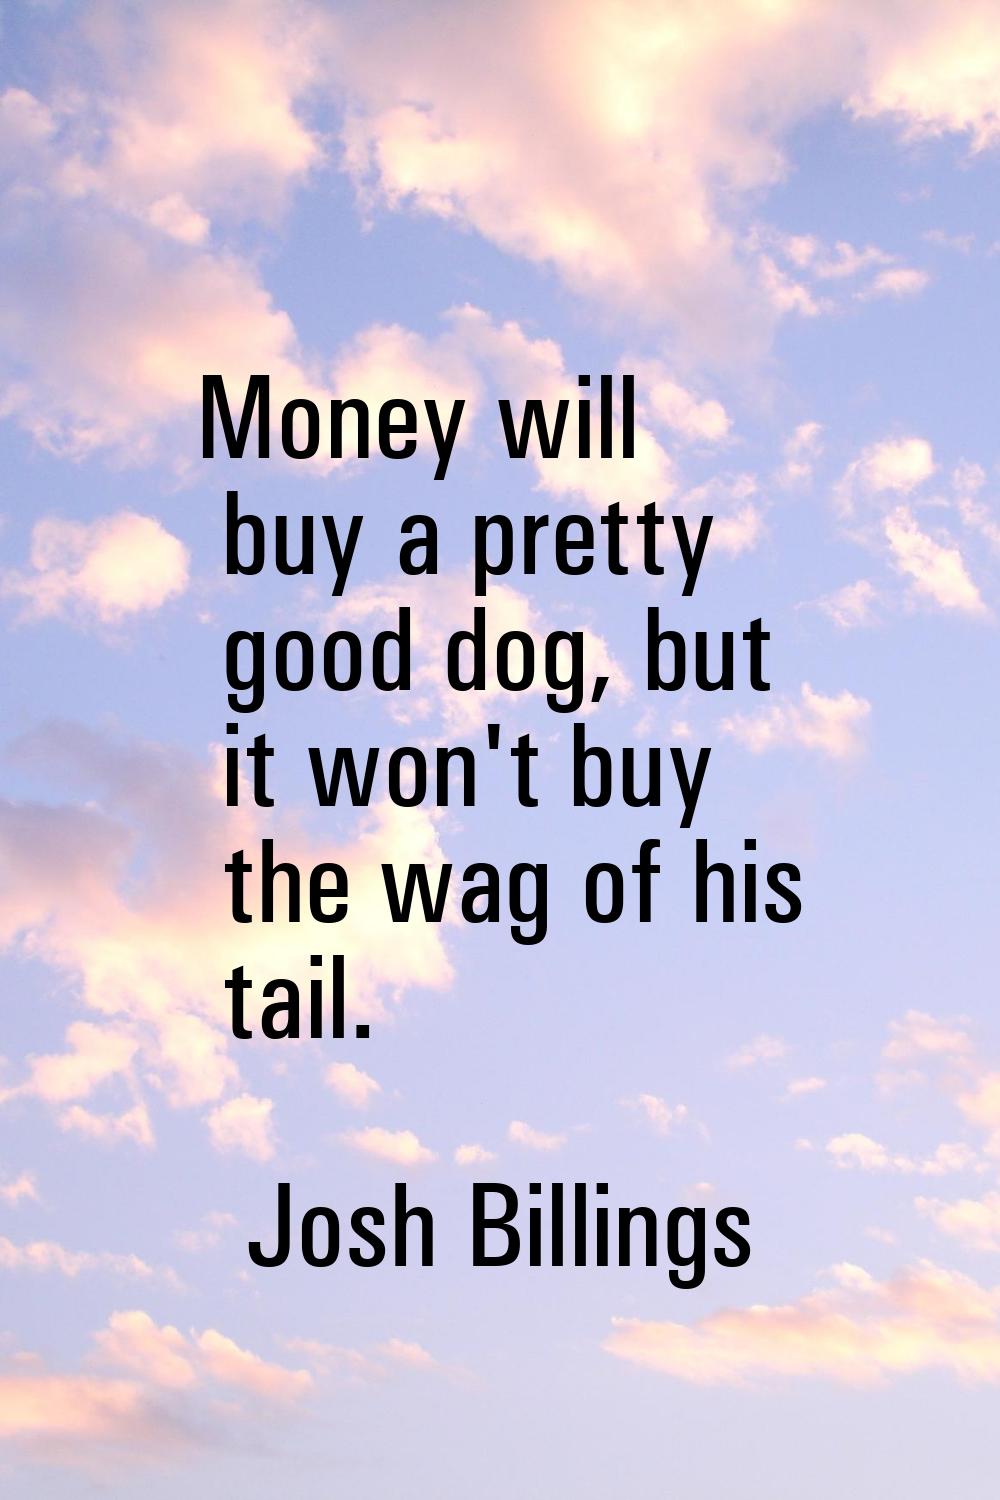 Money will buy a pretty good dog, but it won't buy the wag of his tail.